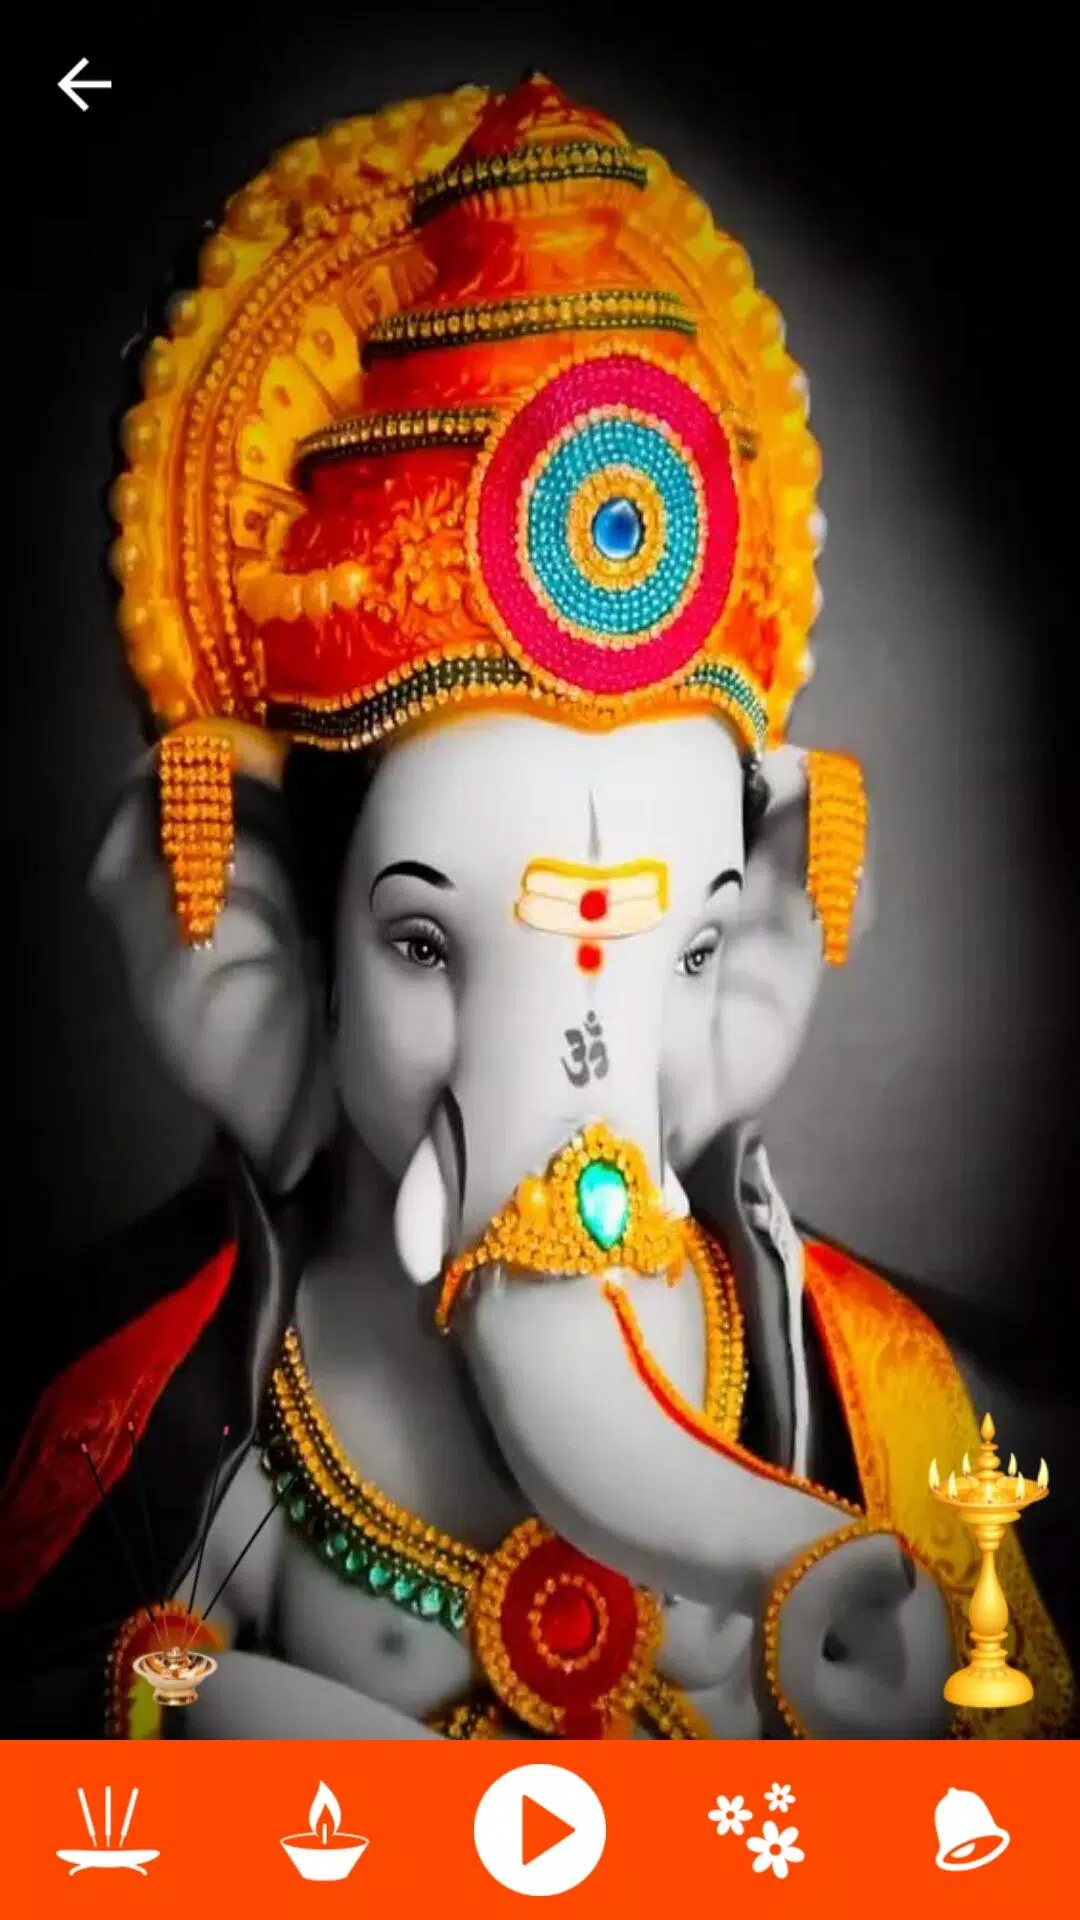 Live ganesha wallpaper hd apk for android download